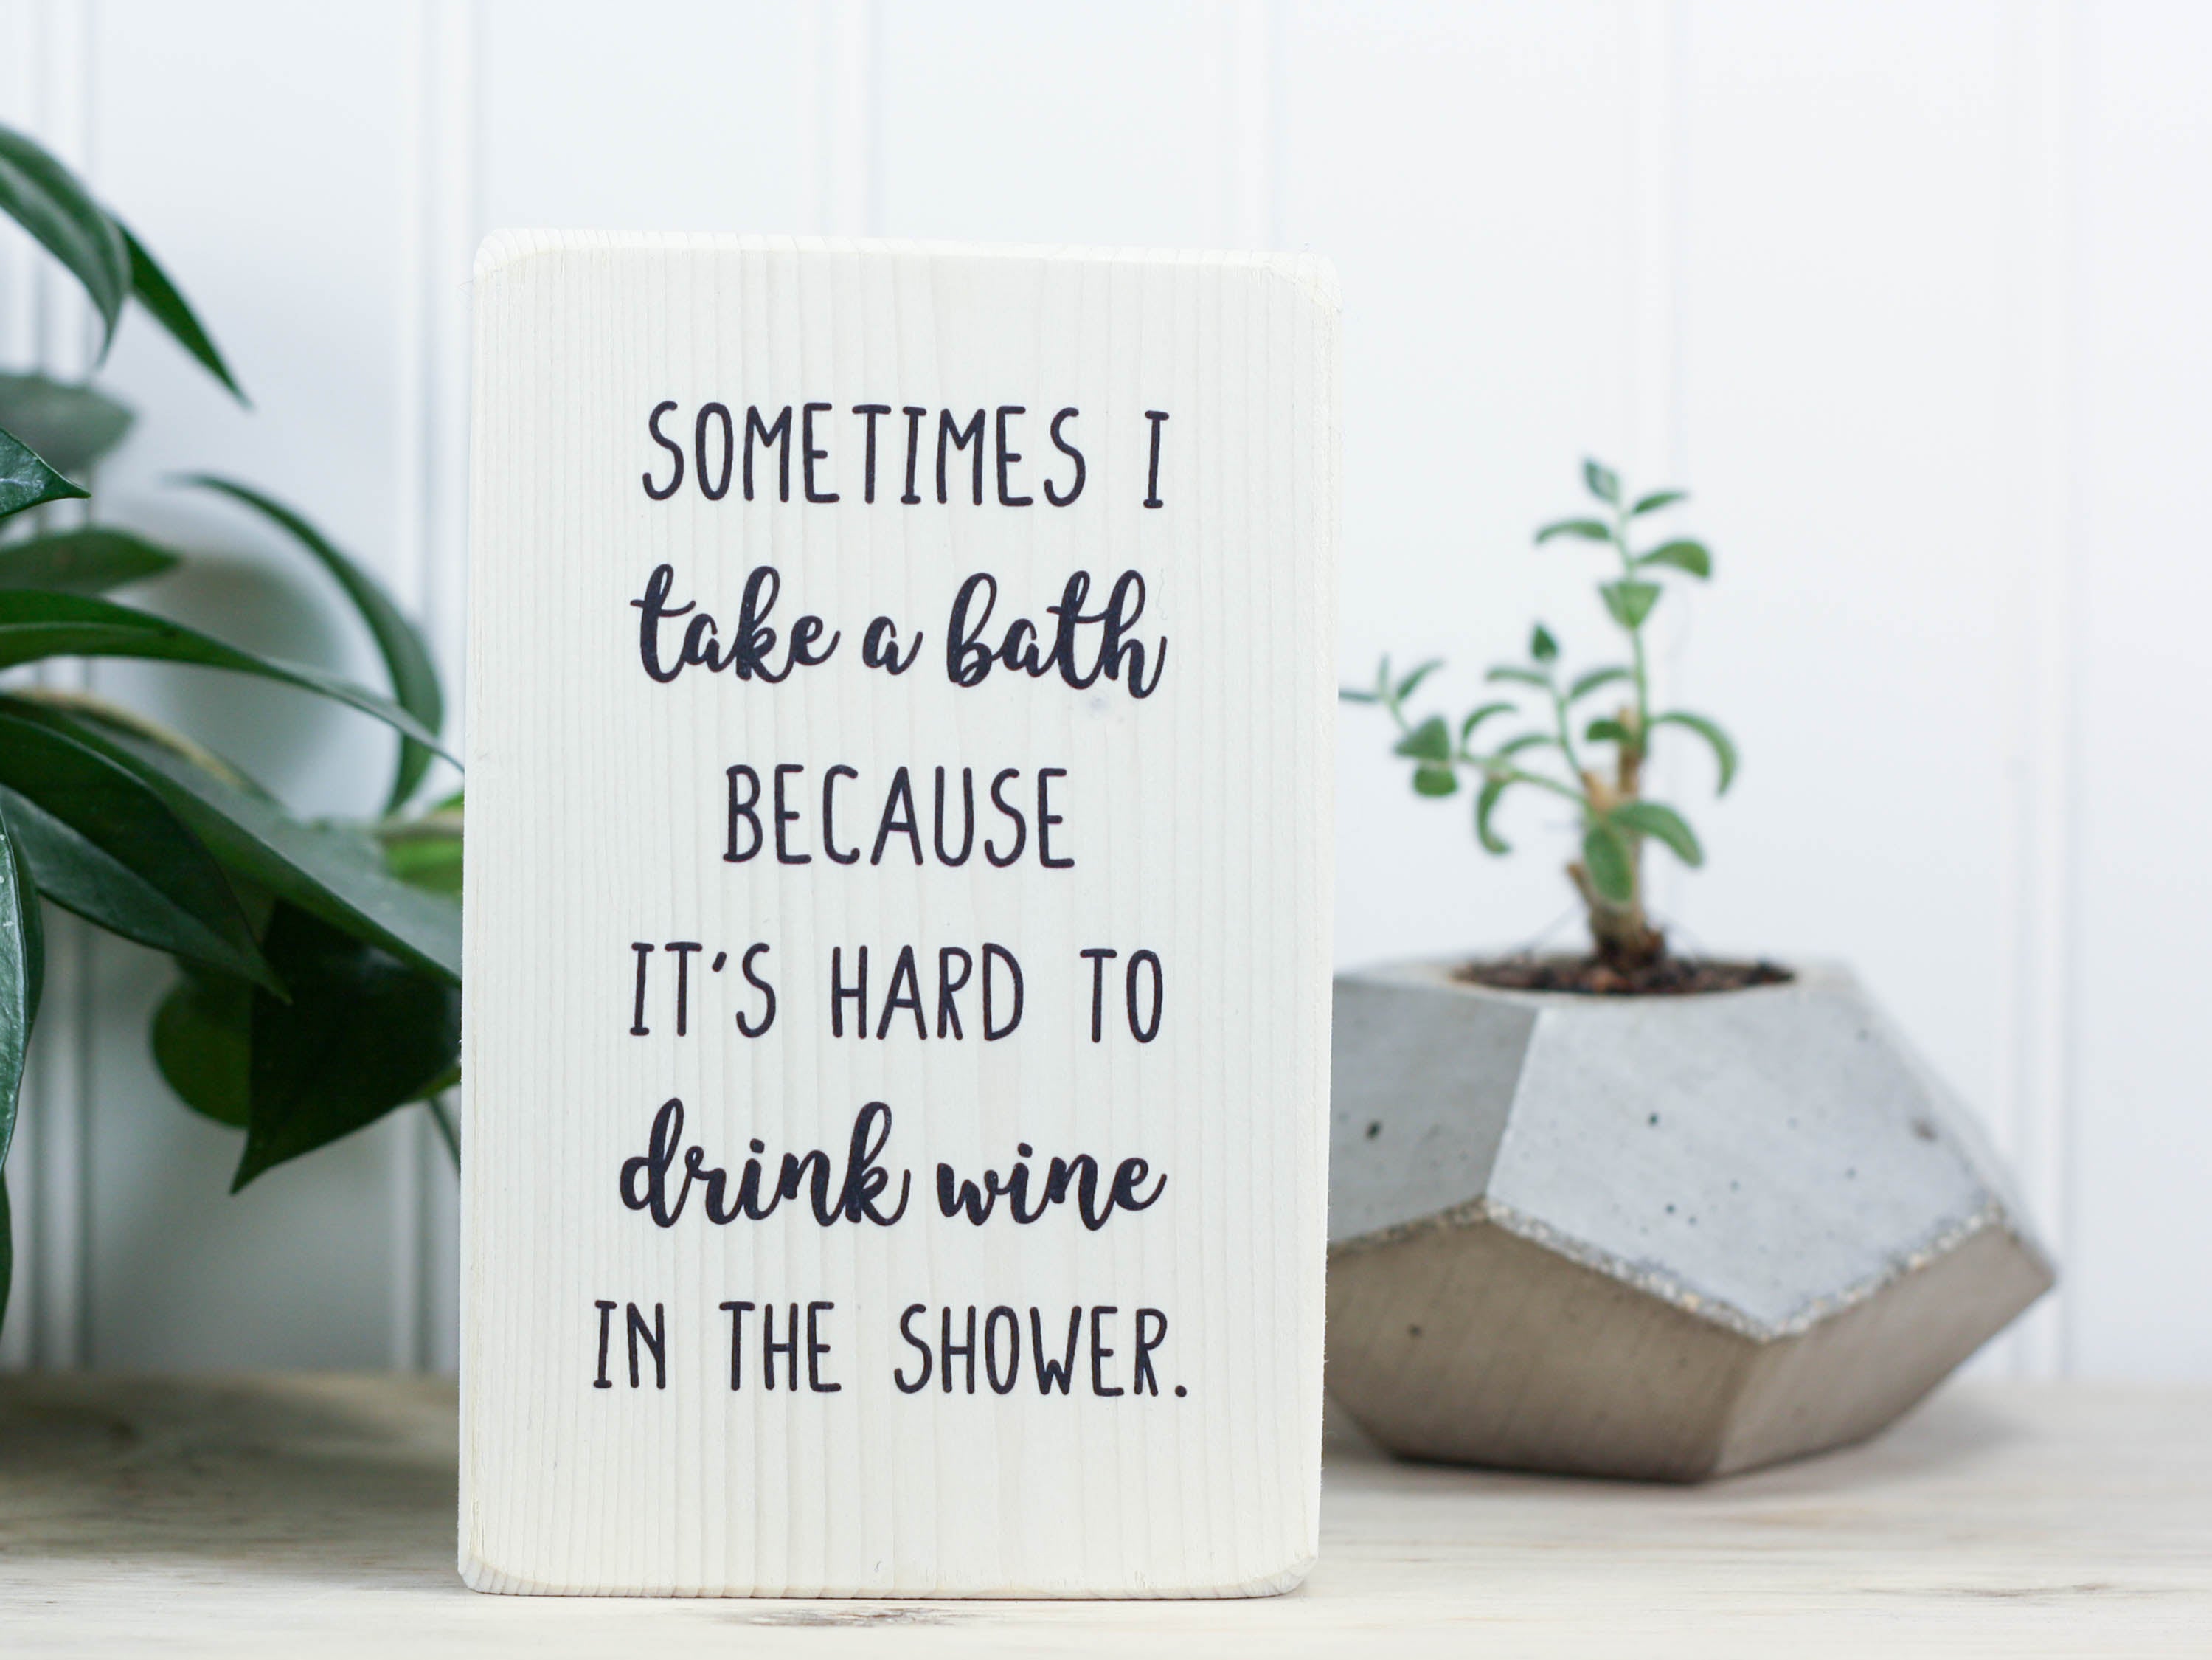 Small wood sign in whitewash with the saying "Sometimes I take a bath because it's hard to drink wine in the shower."